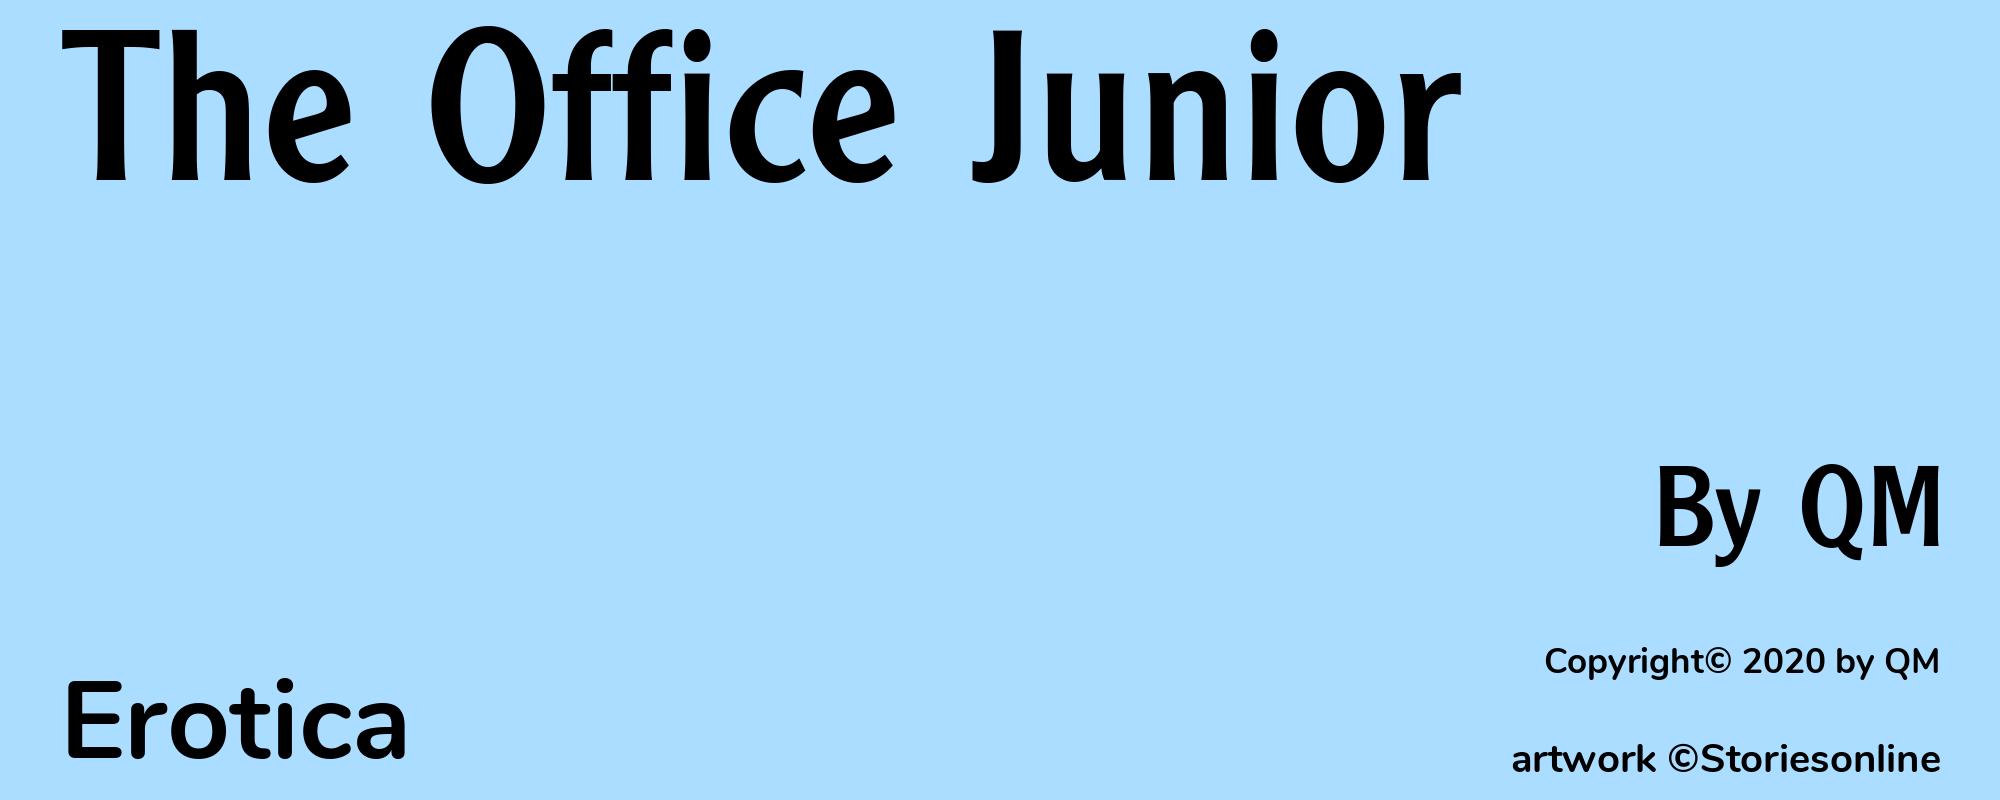 The Office Junior - Cover